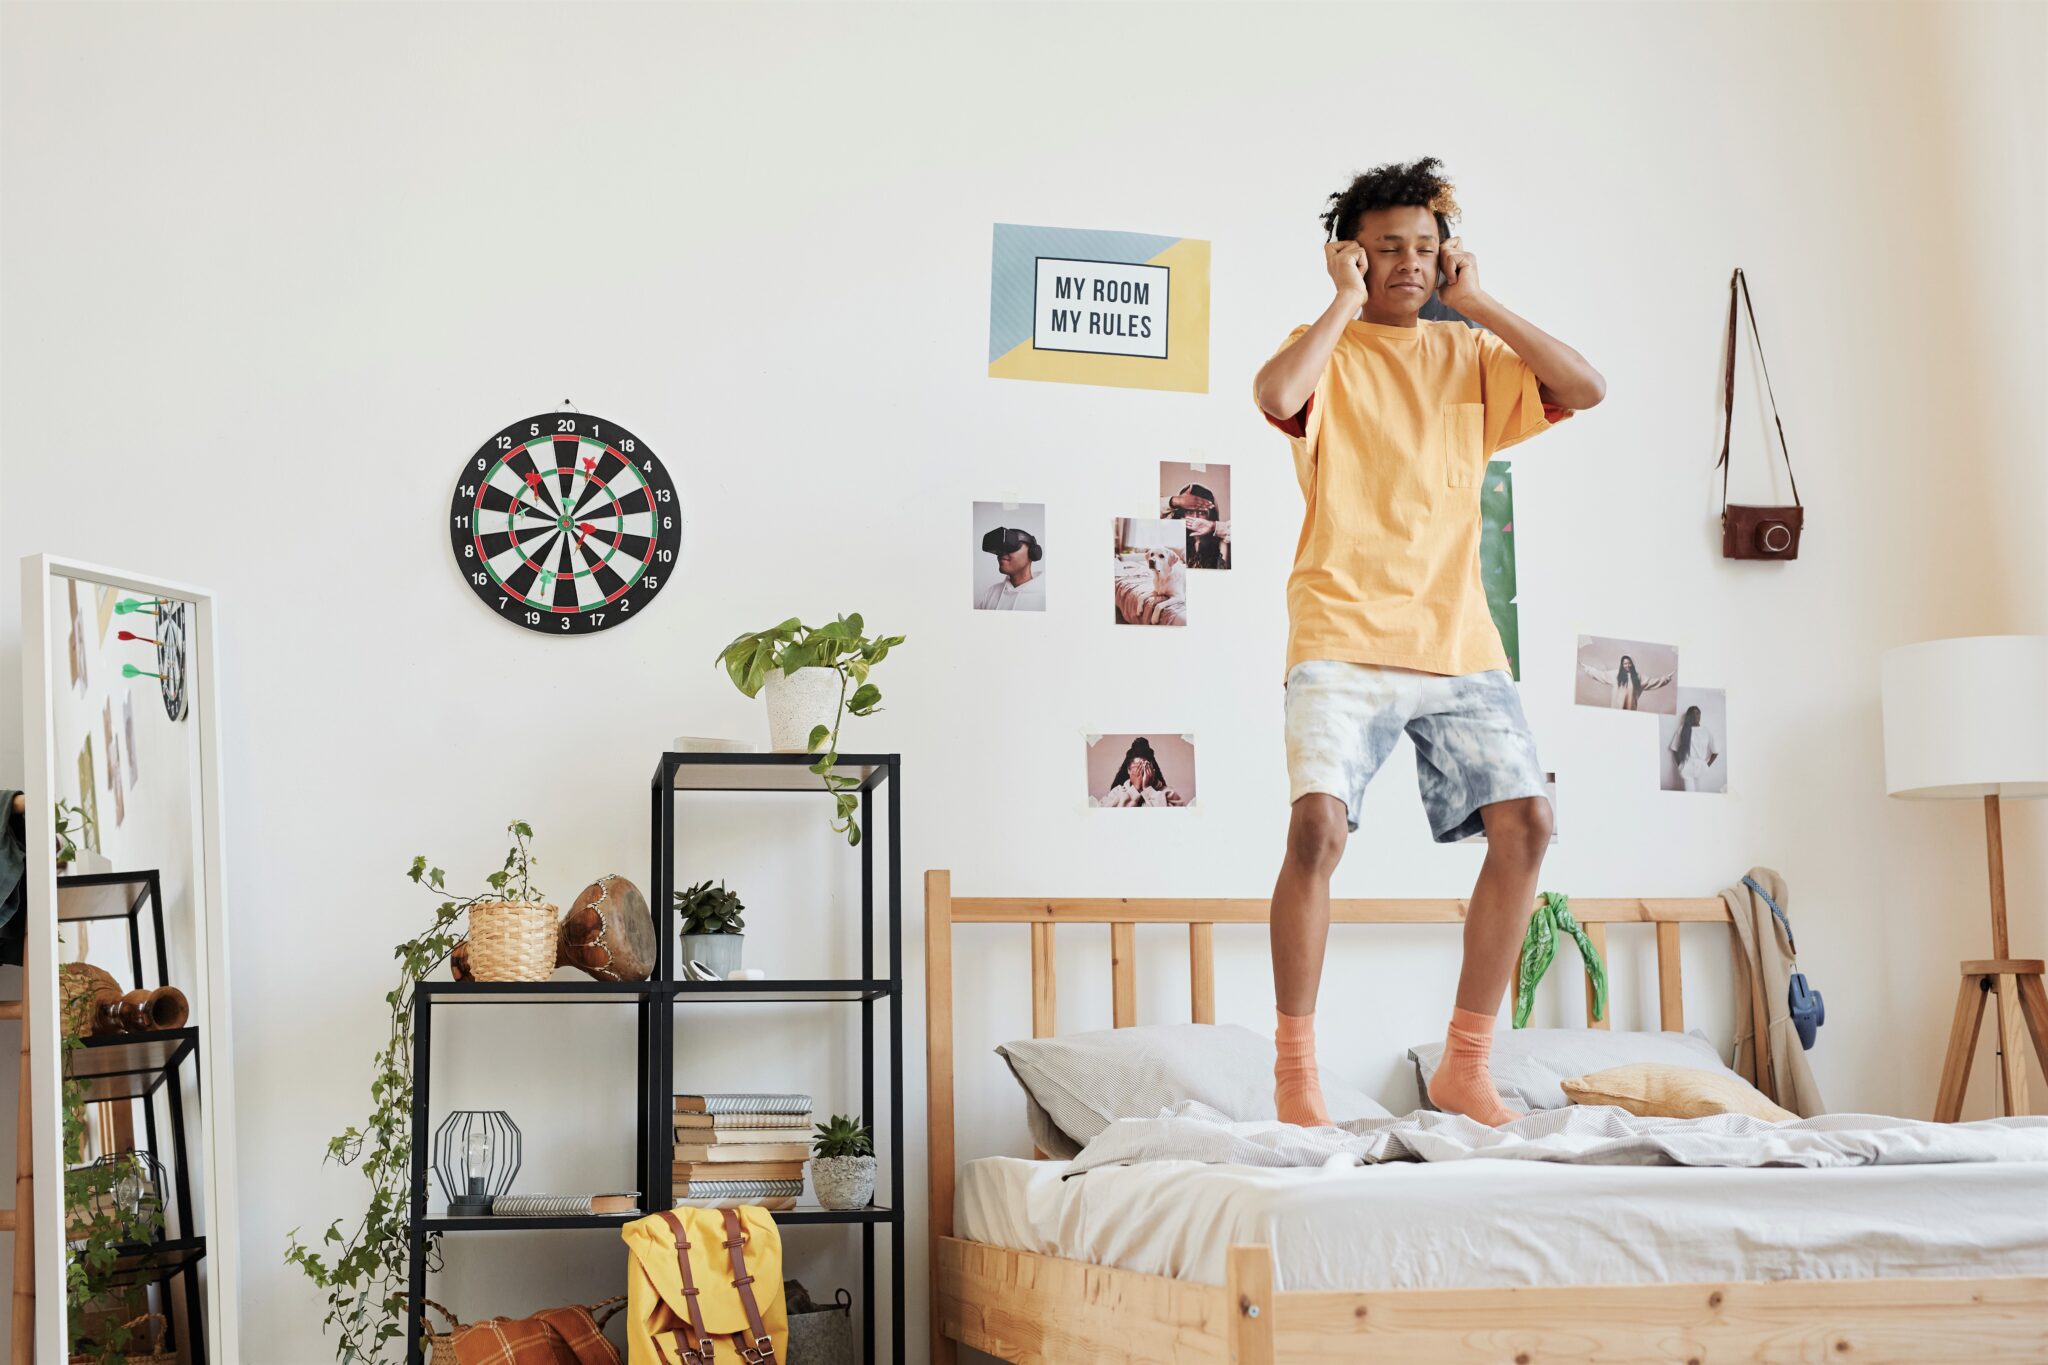 Things to keep in mind when designing a room for your teenager